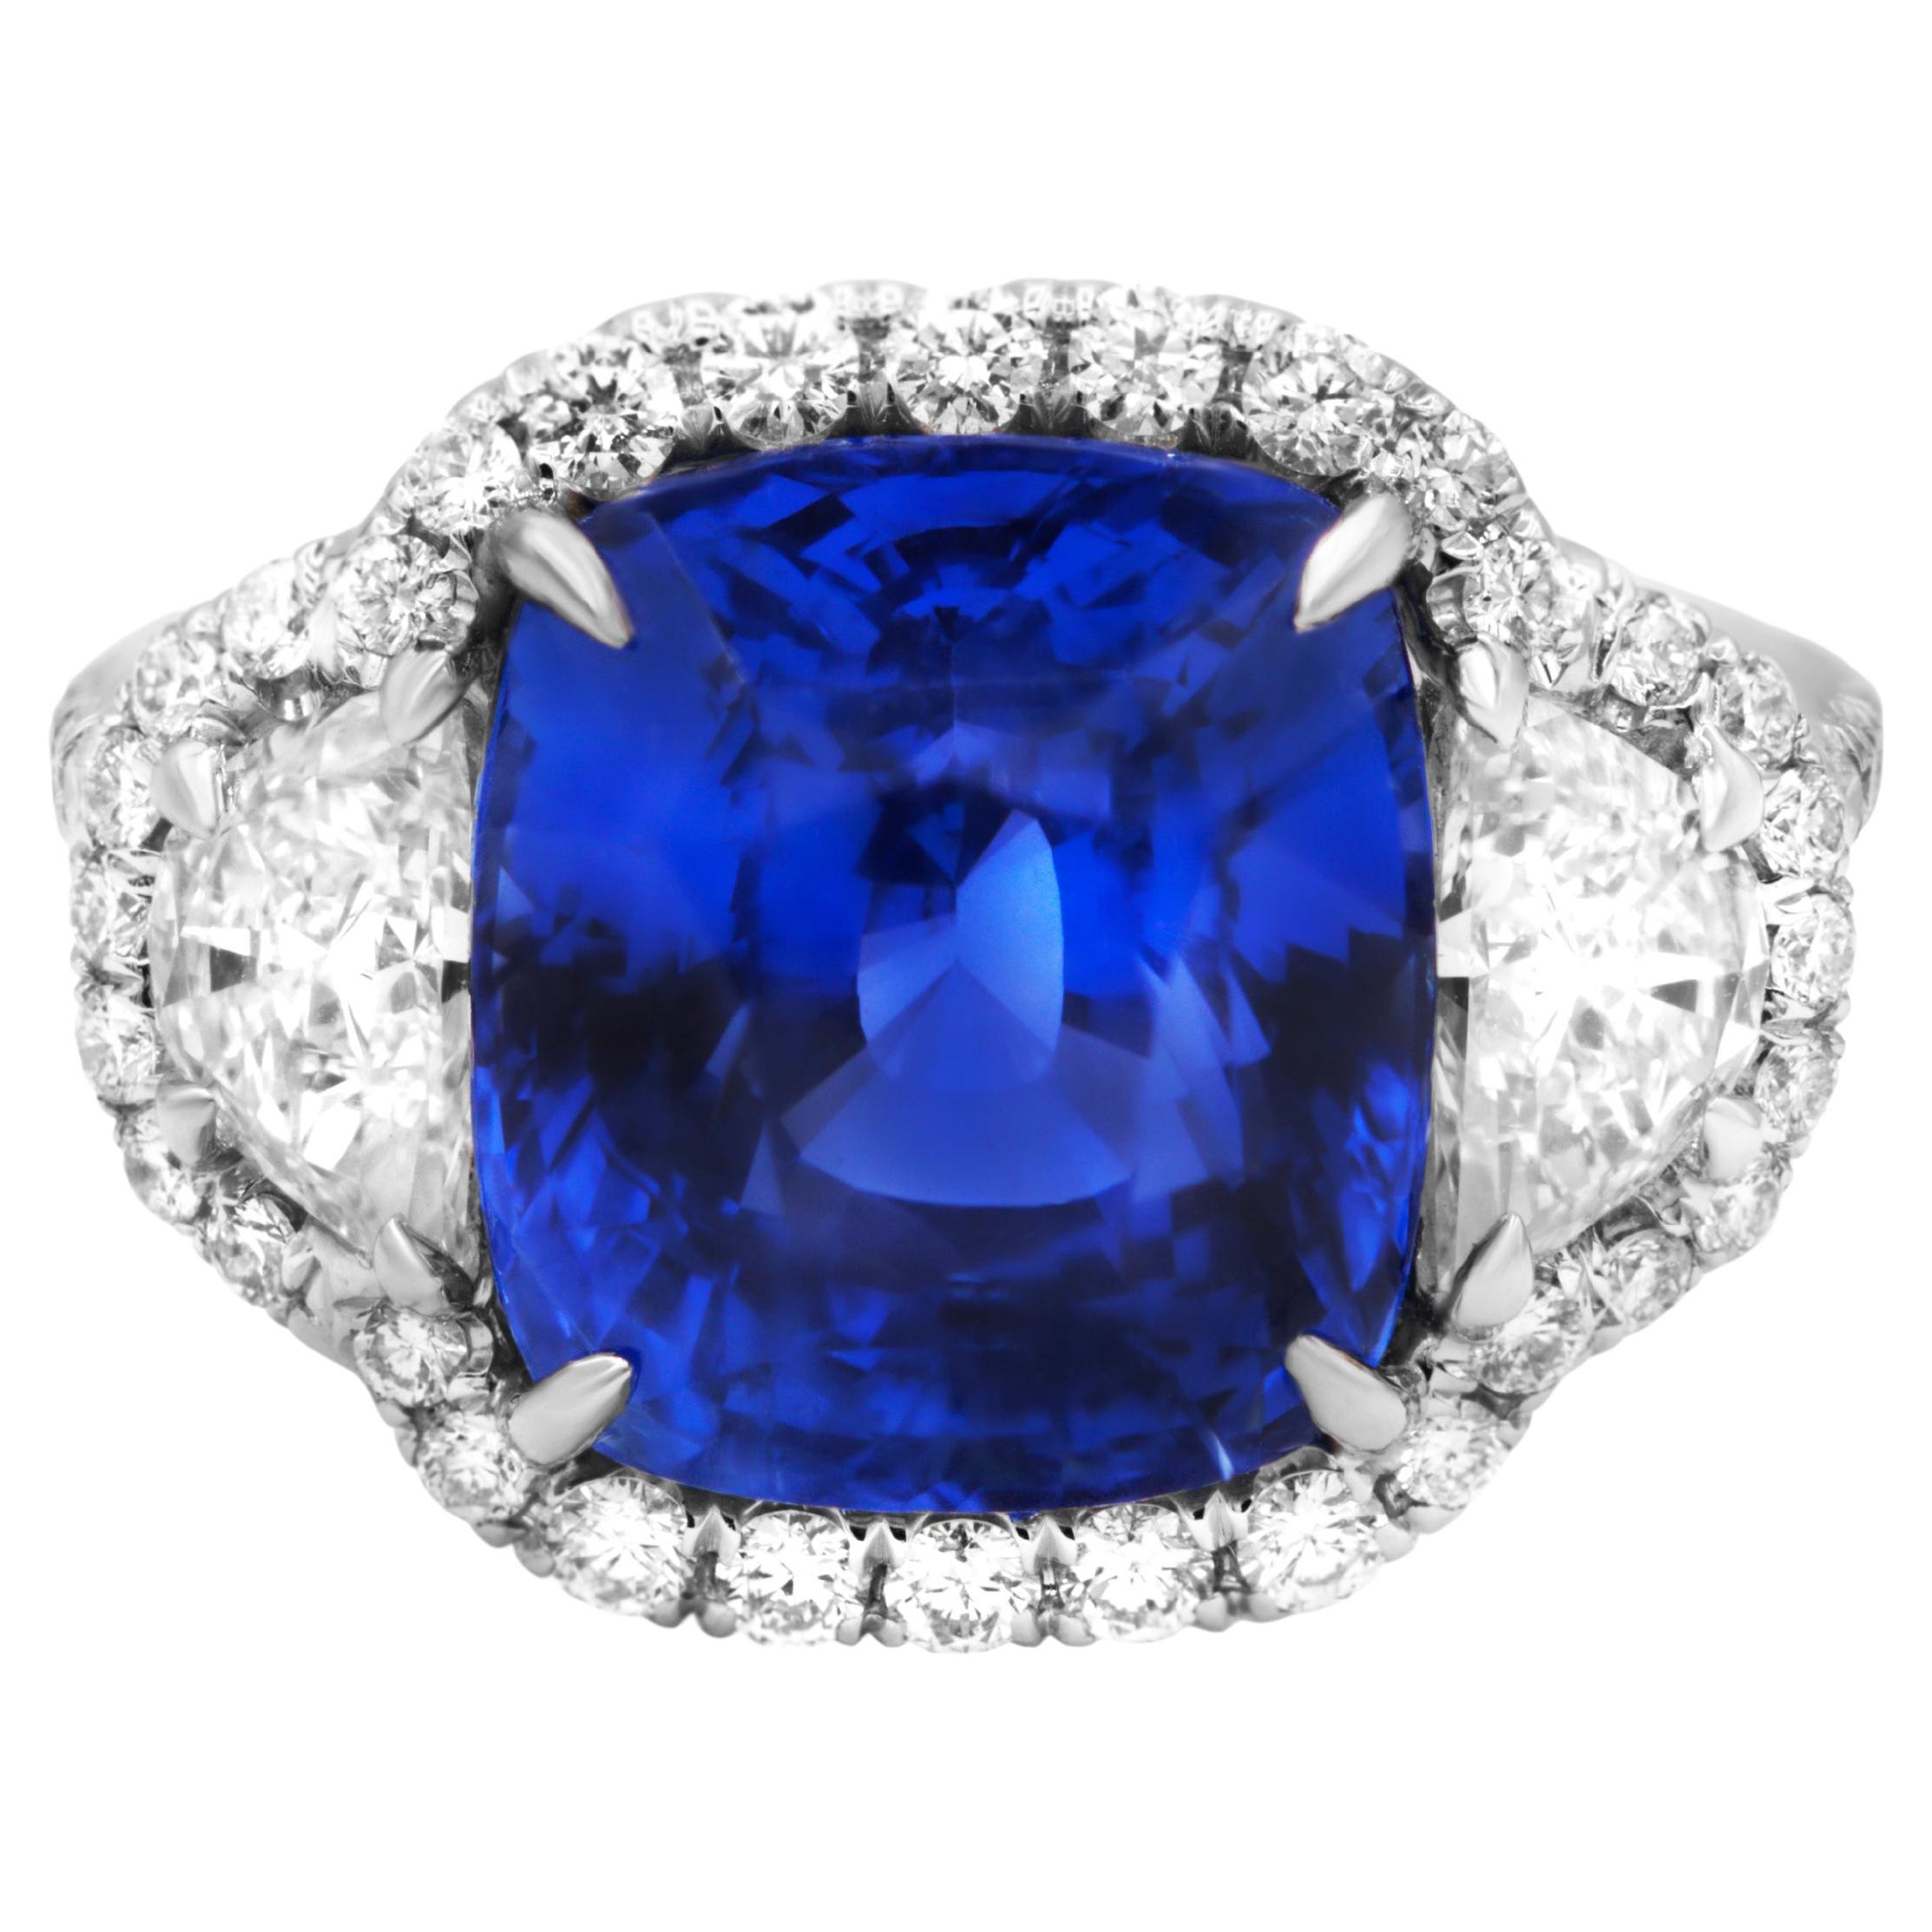 Diana M. Platinum sapphire and diamond ring featuring a 9.11 ct GRS certified 